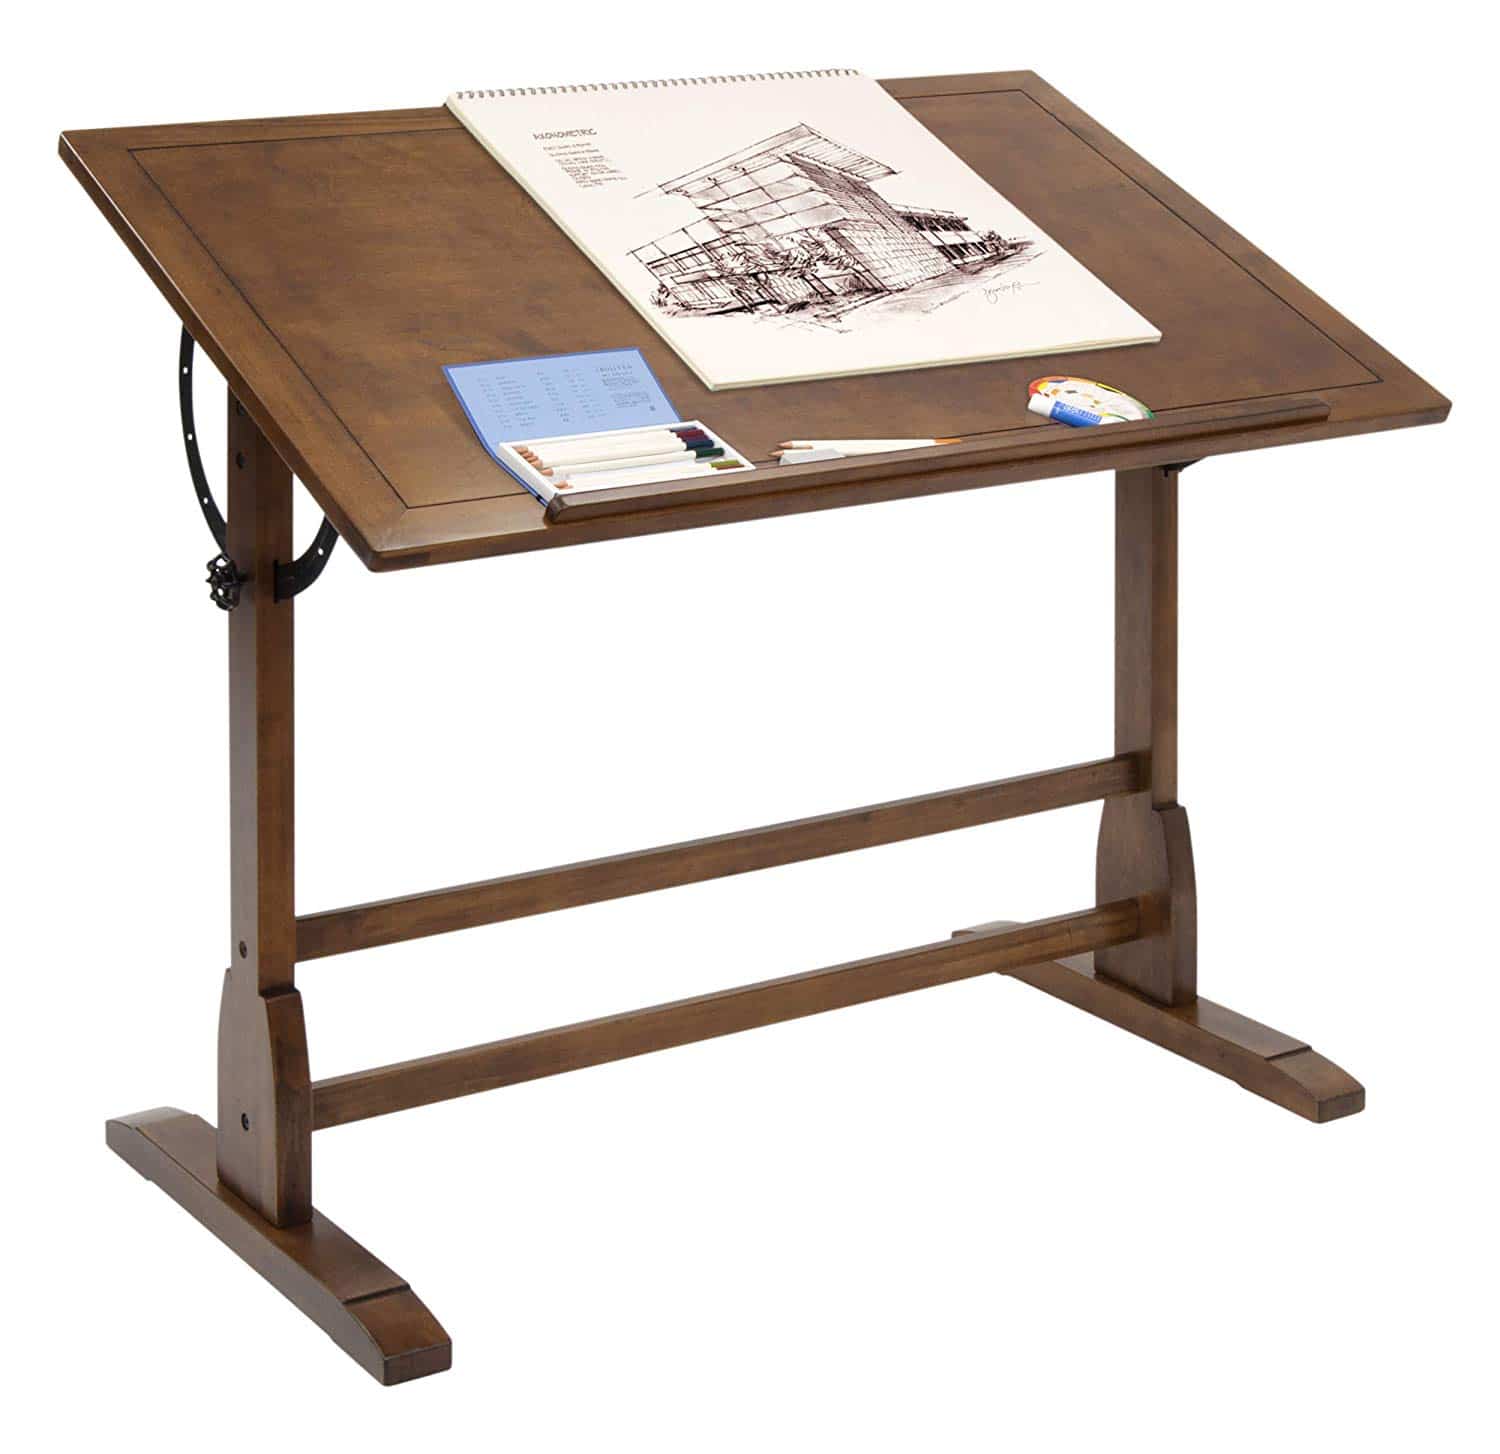 Top 10 Best Drafting Tables for Architects in 2021 Reviews Buyer's Guide